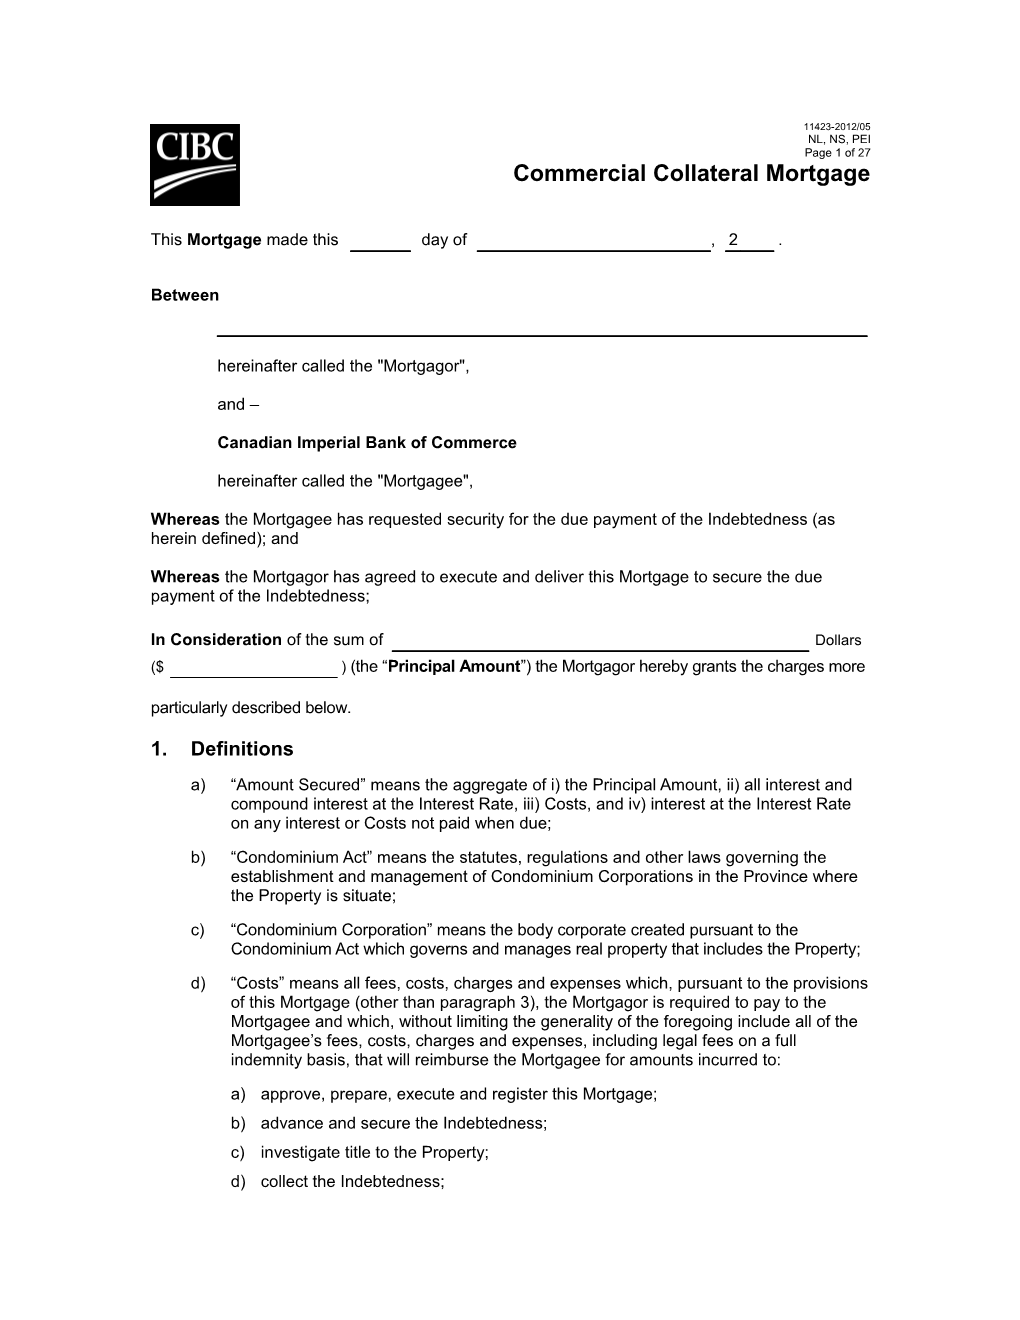 Commercial Collateral Mortgage (11423 NL, NS, PEI-2012/05)